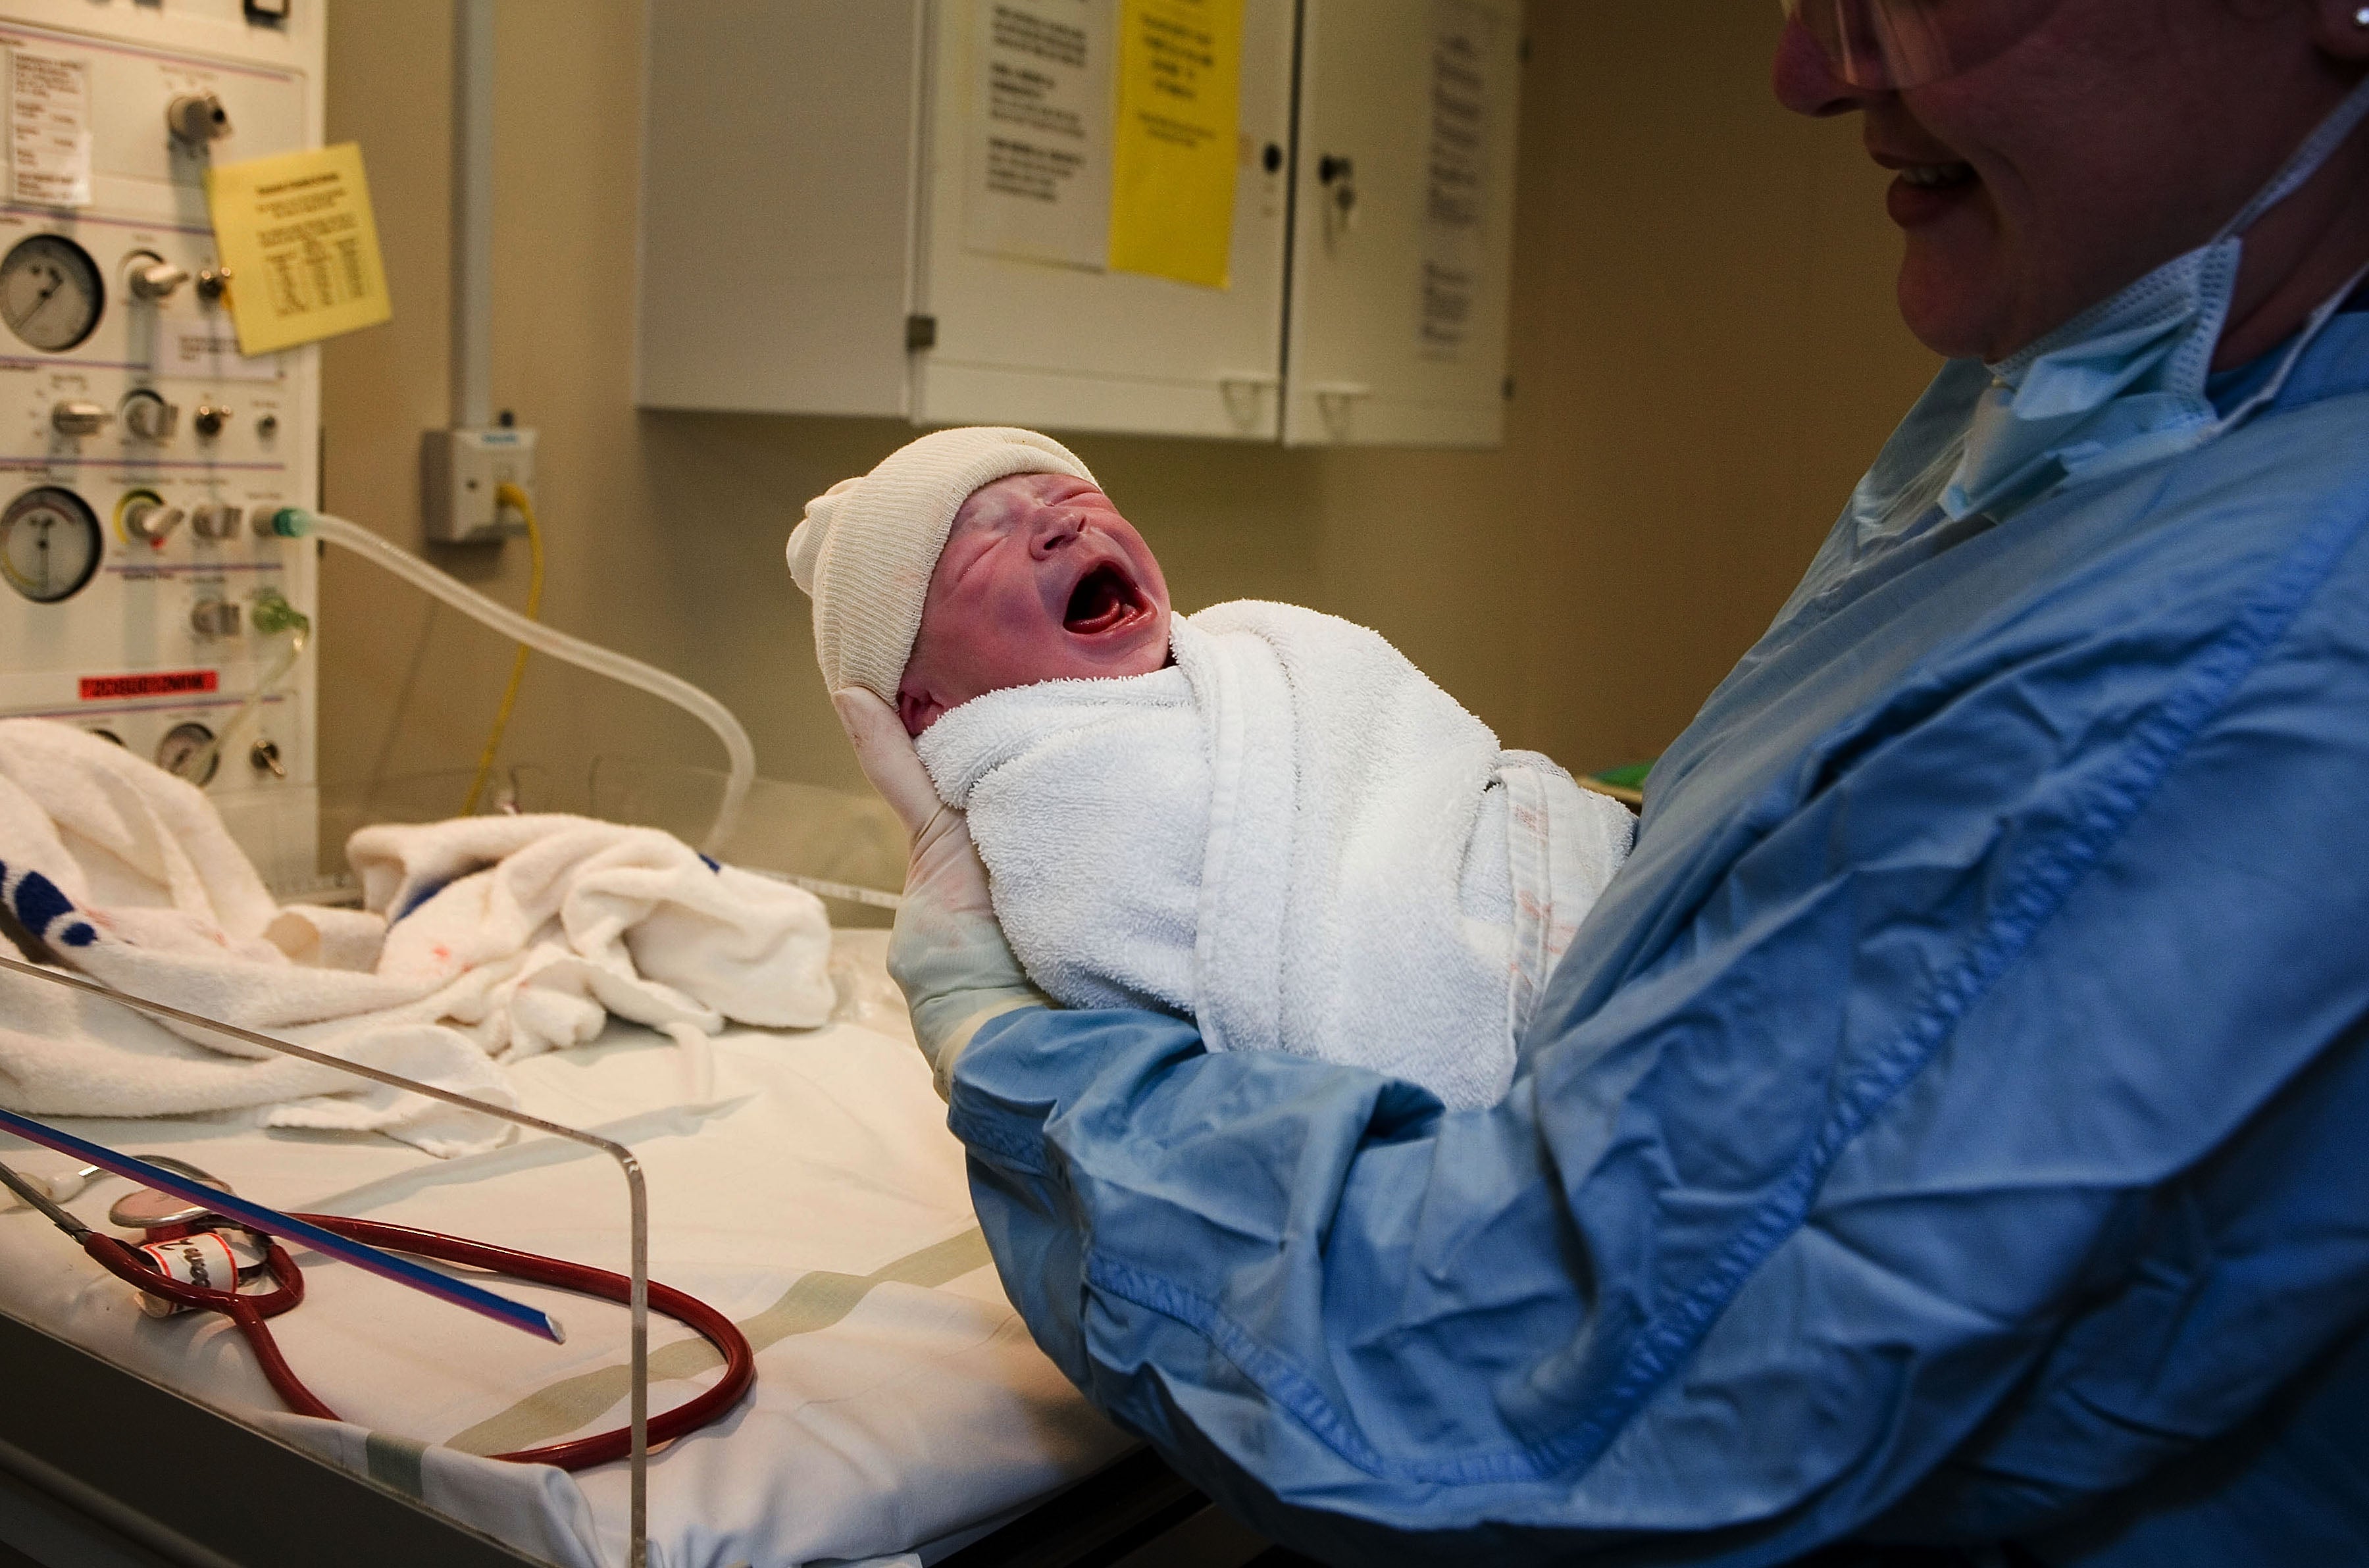 File: In this file photograph dated 6 March 2007, a young boy is weighed after being born in an NHS maternity unit, in Manchester, England